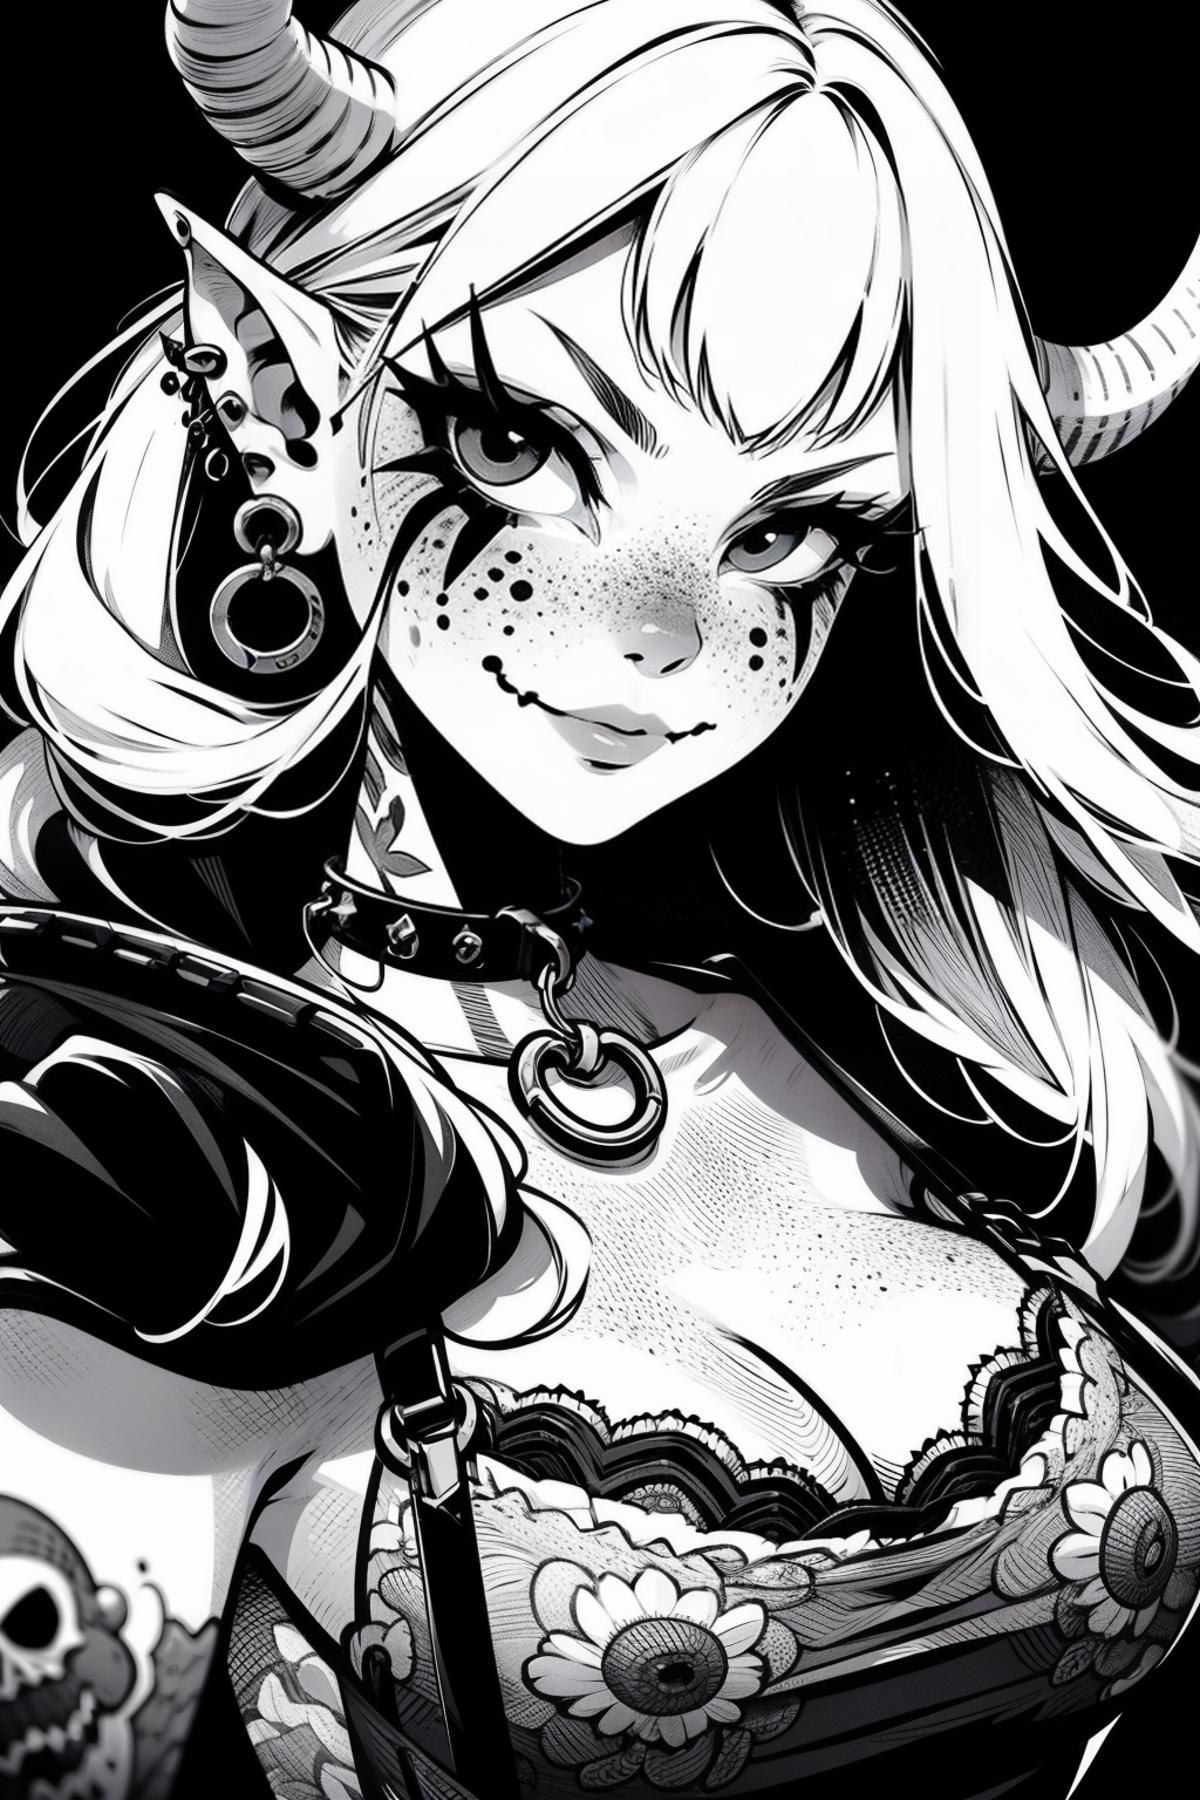 Thick Lined B&W Anime image by freckledvixon